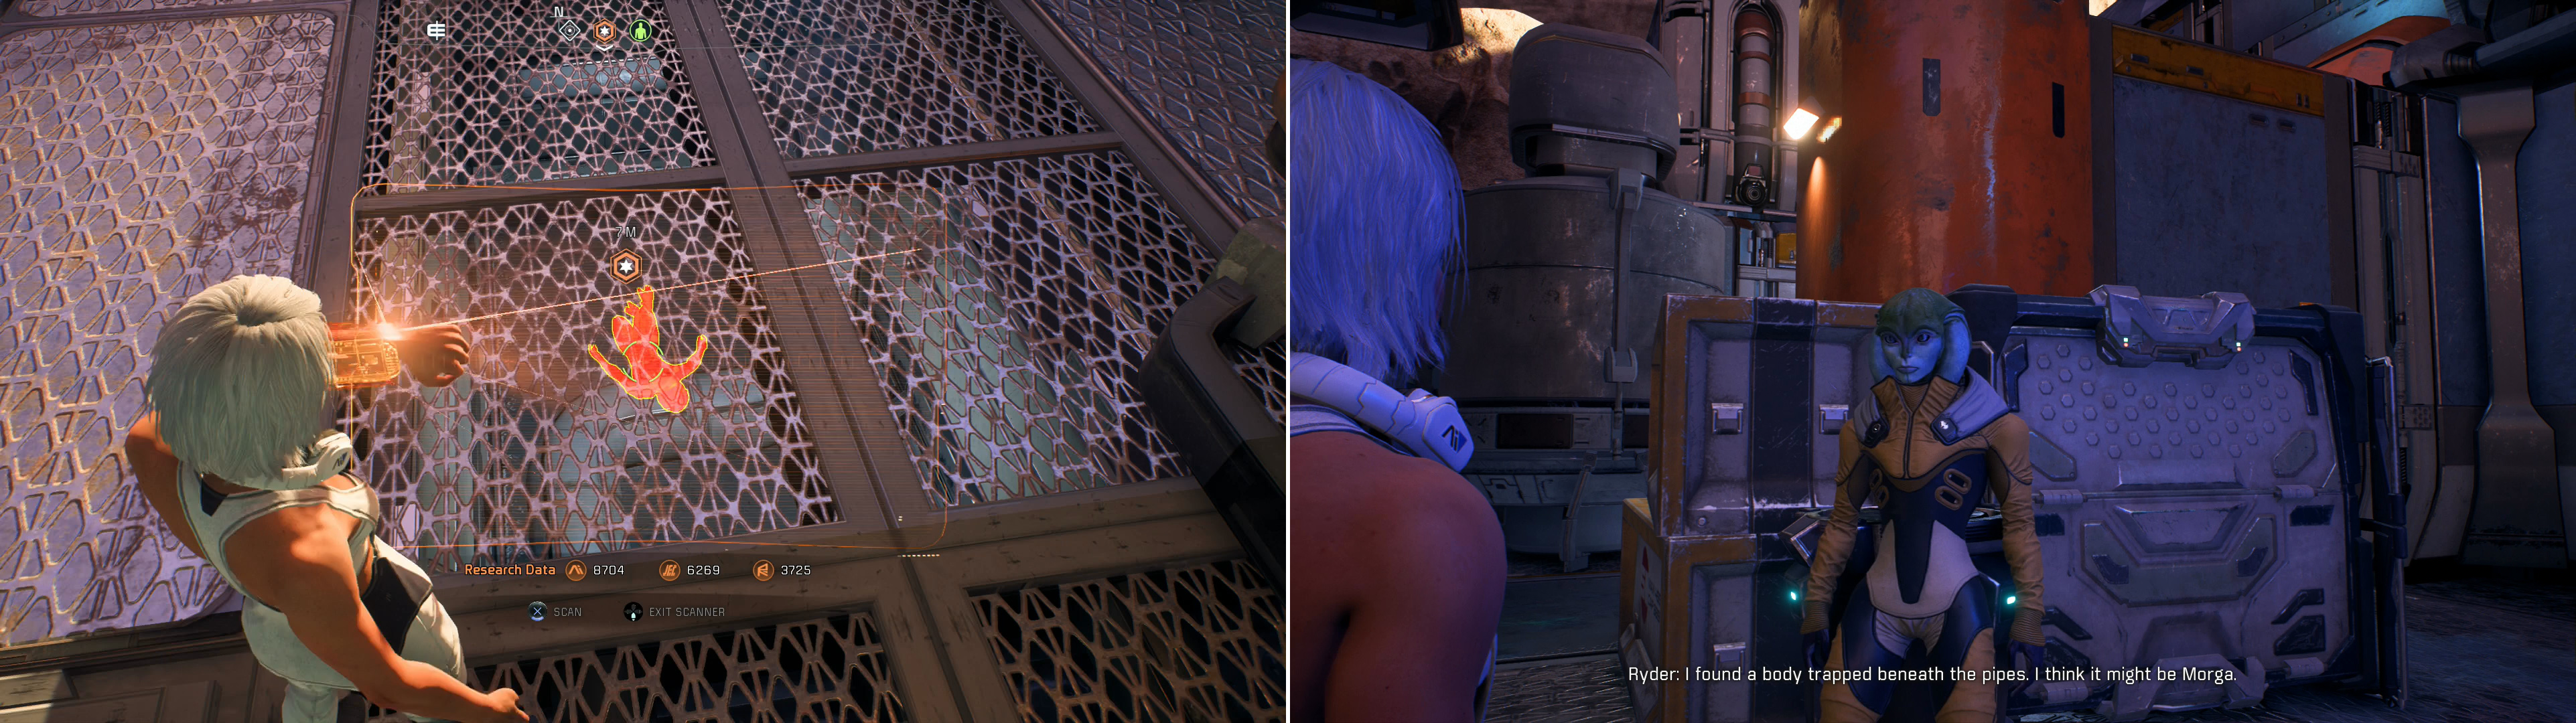 Scan the floor of the marketplace to locate Morga (left) then give her sister the bad news (right).